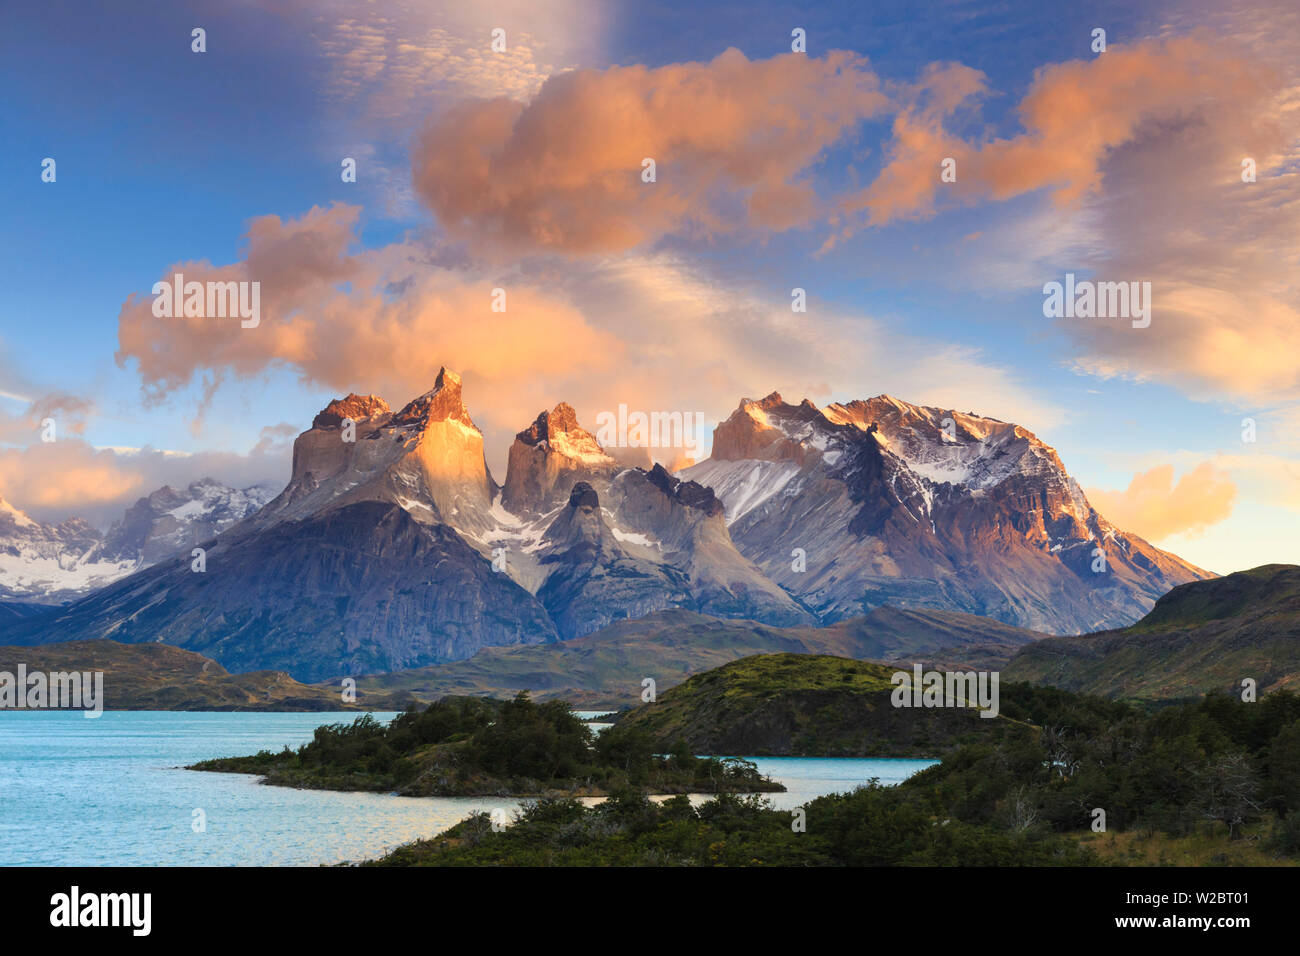 Chile, Patagonia, Torres del Paine National Park (UNESCO Site), Lake Pehoe Stock Photo